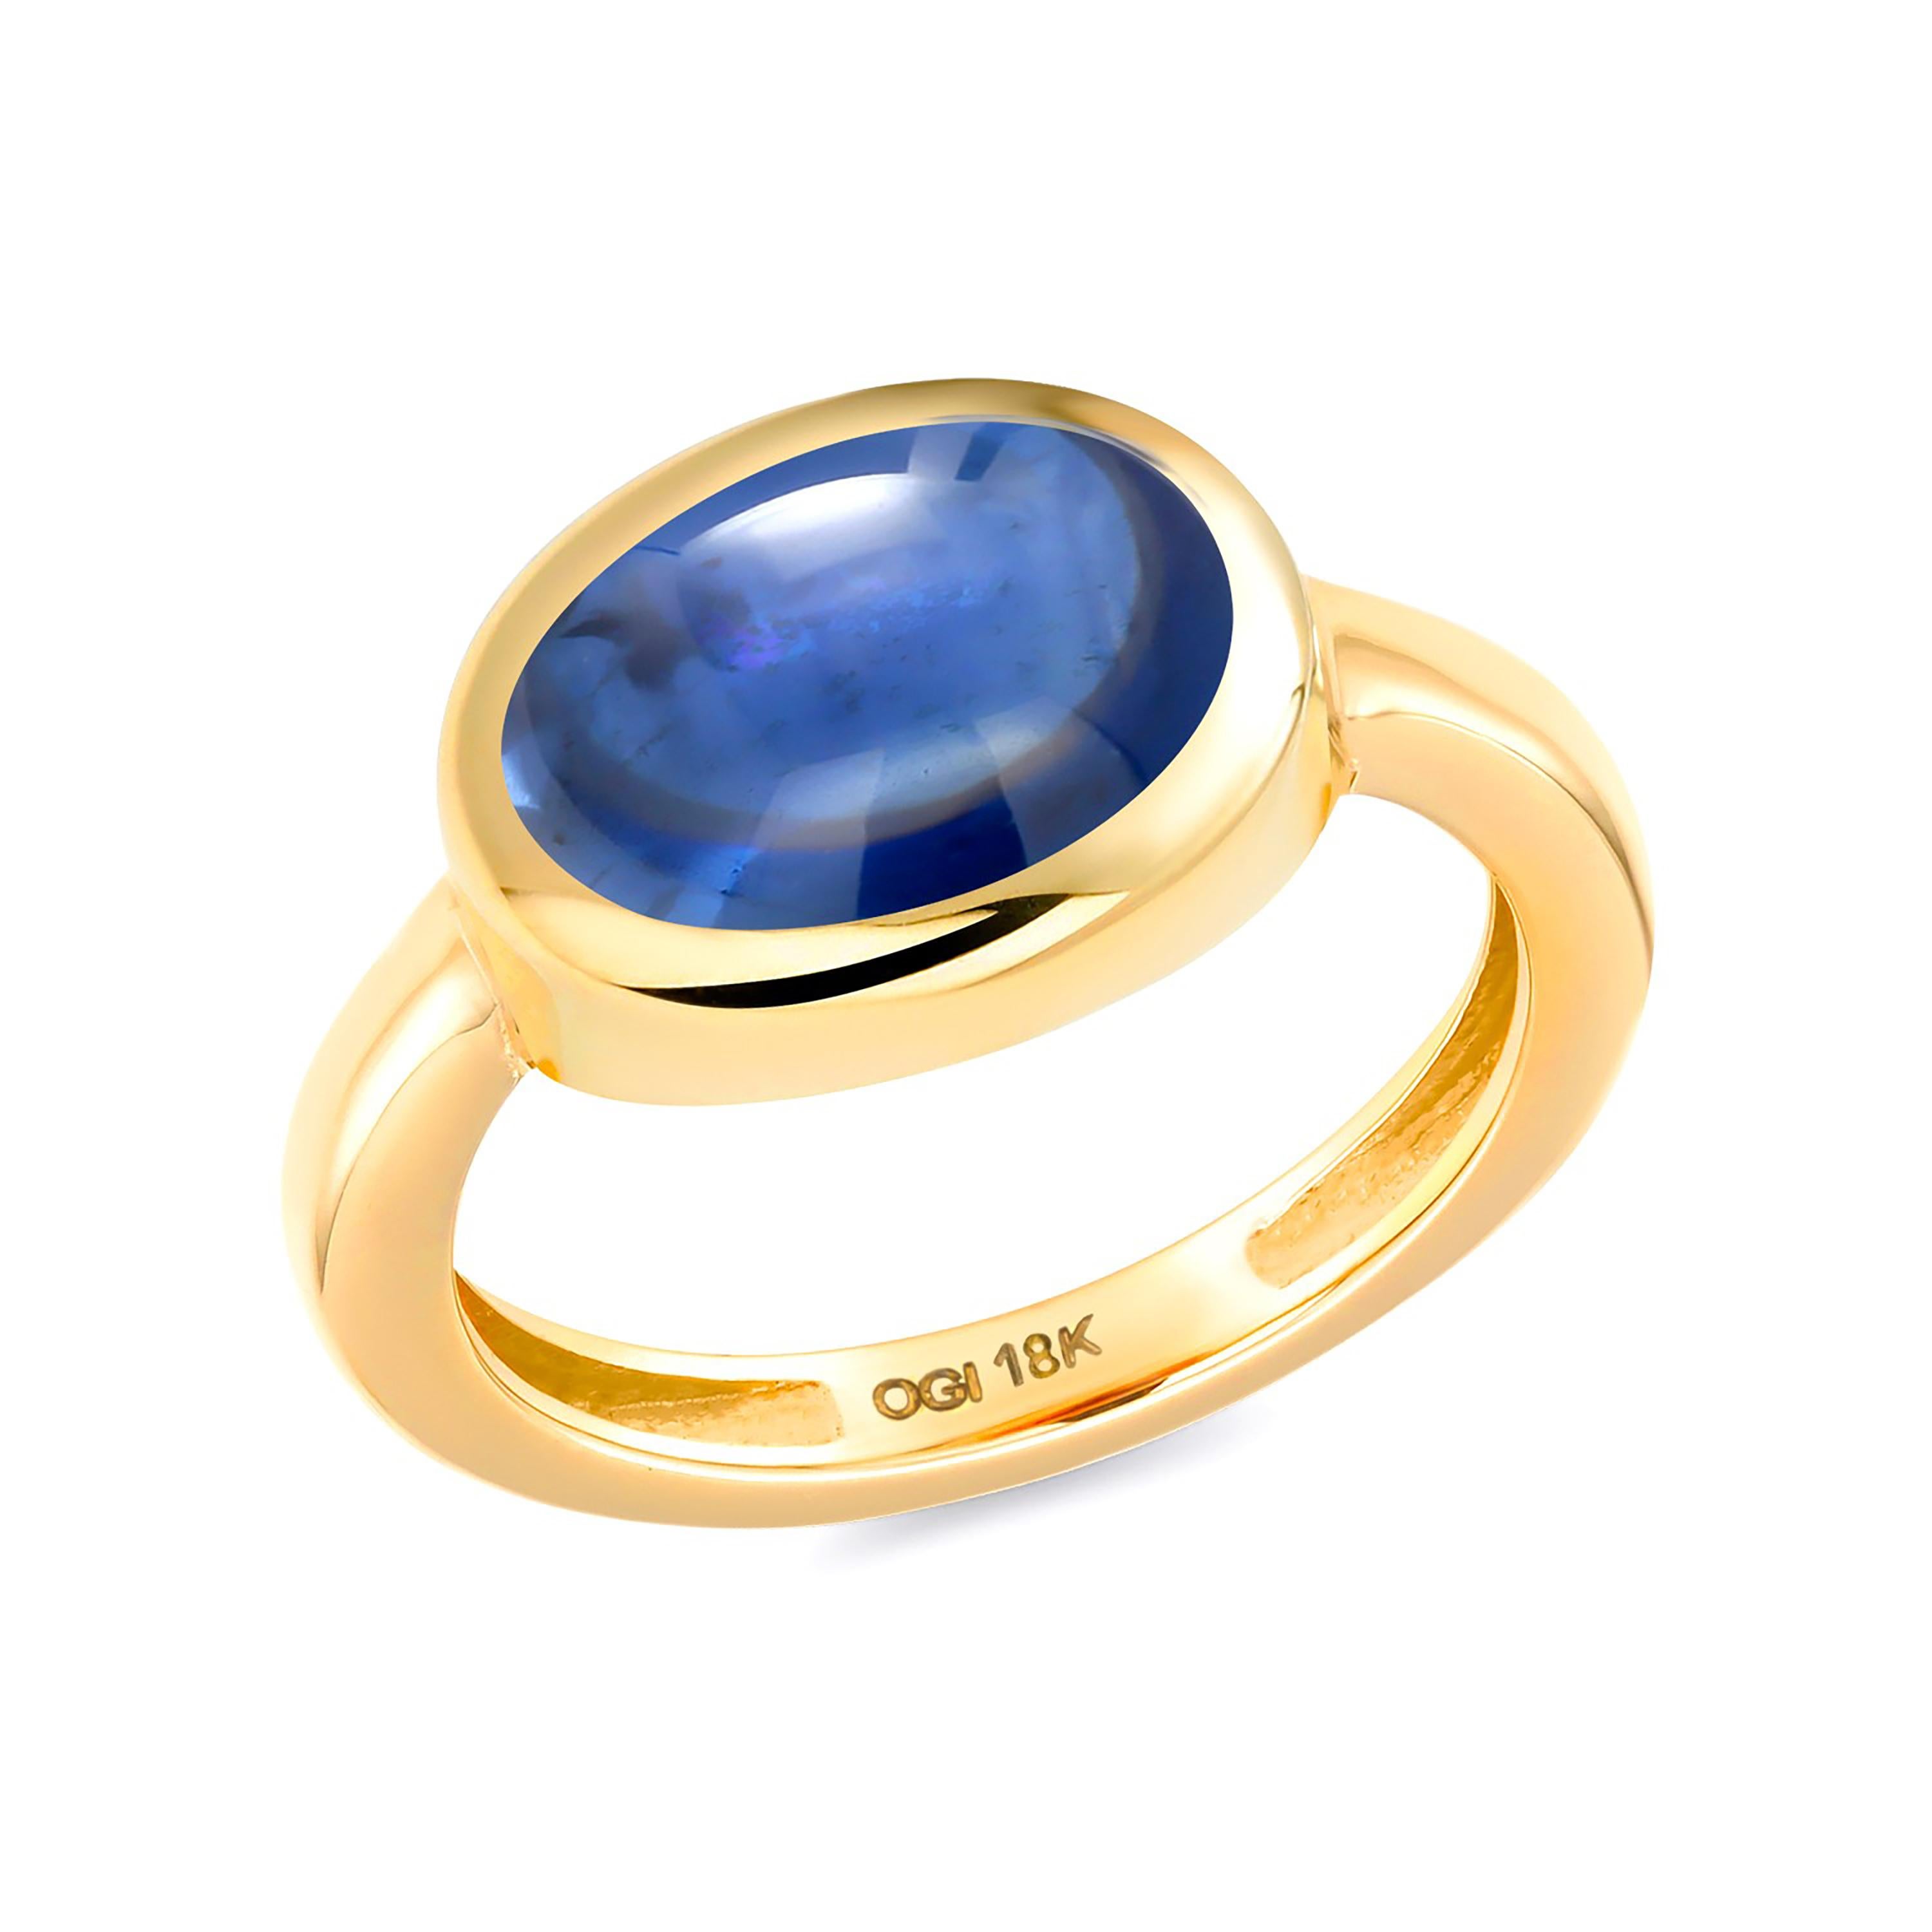 Oval Cut Ceylon Cabochon Sapphire Raised Dome Yellow Gold Solitaire Cocktail Ring